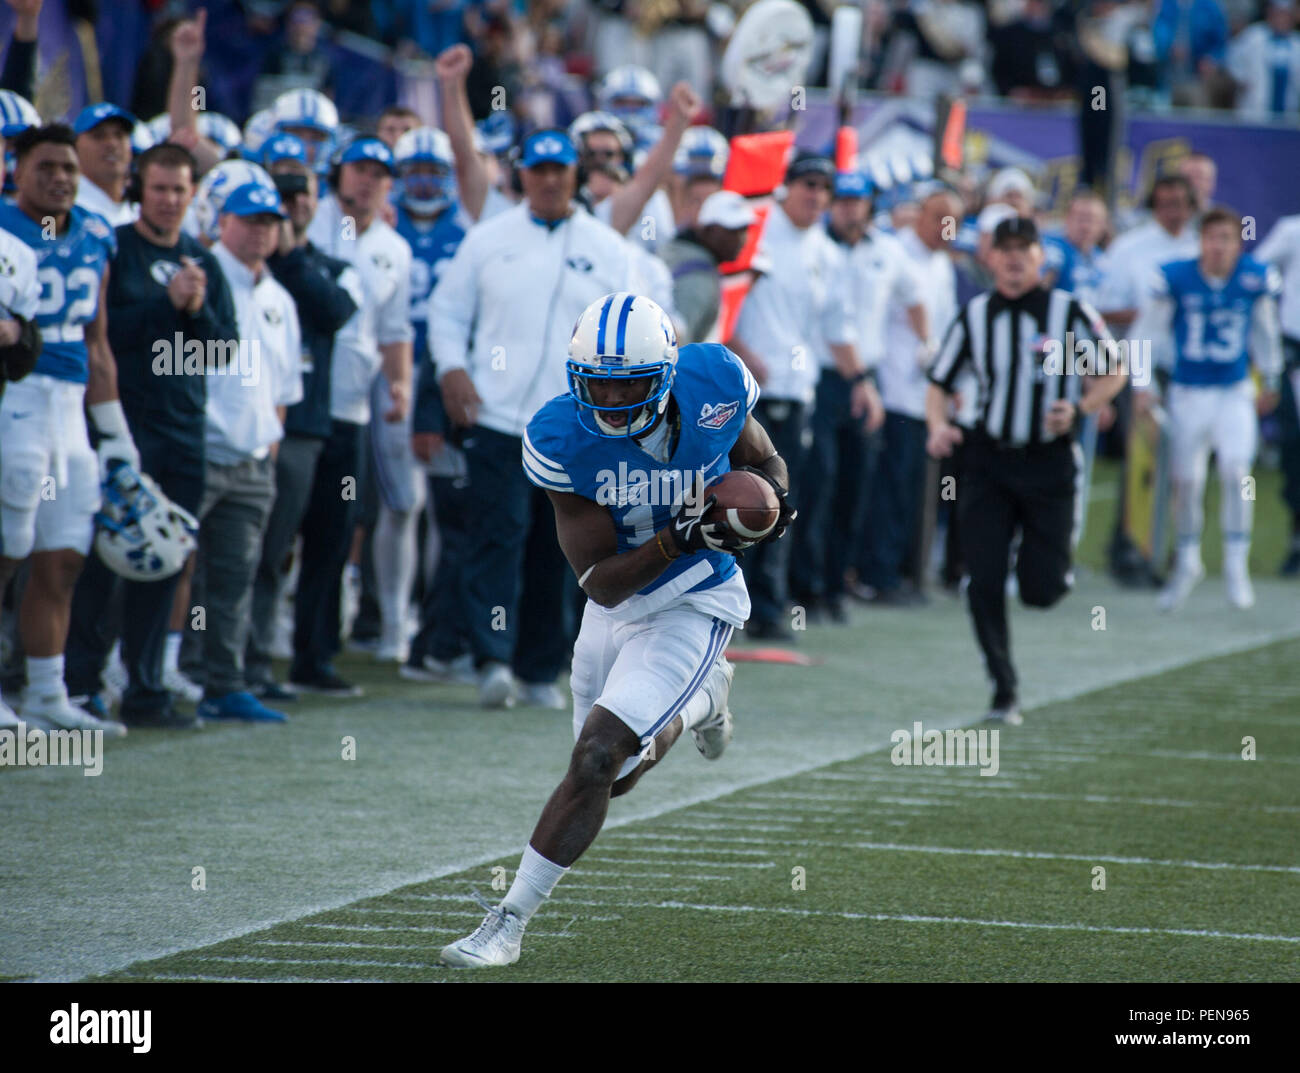 Brigham Young University wide receiver Devon Blackman tries to stay in bounds after catching a long pass during the Royal Purple Las Vegas Bowl at Sam Boyd Stadium in Las Vegas, Dec. 19, 2015. The BYU Cougars fell behind quickly in the first quarter 35-0 to the Utah Utes, rallied late in the game, but came up a touchdown short. (U.S. Air Force photo by Senior Airman Thomas Spangler) Stock Photo